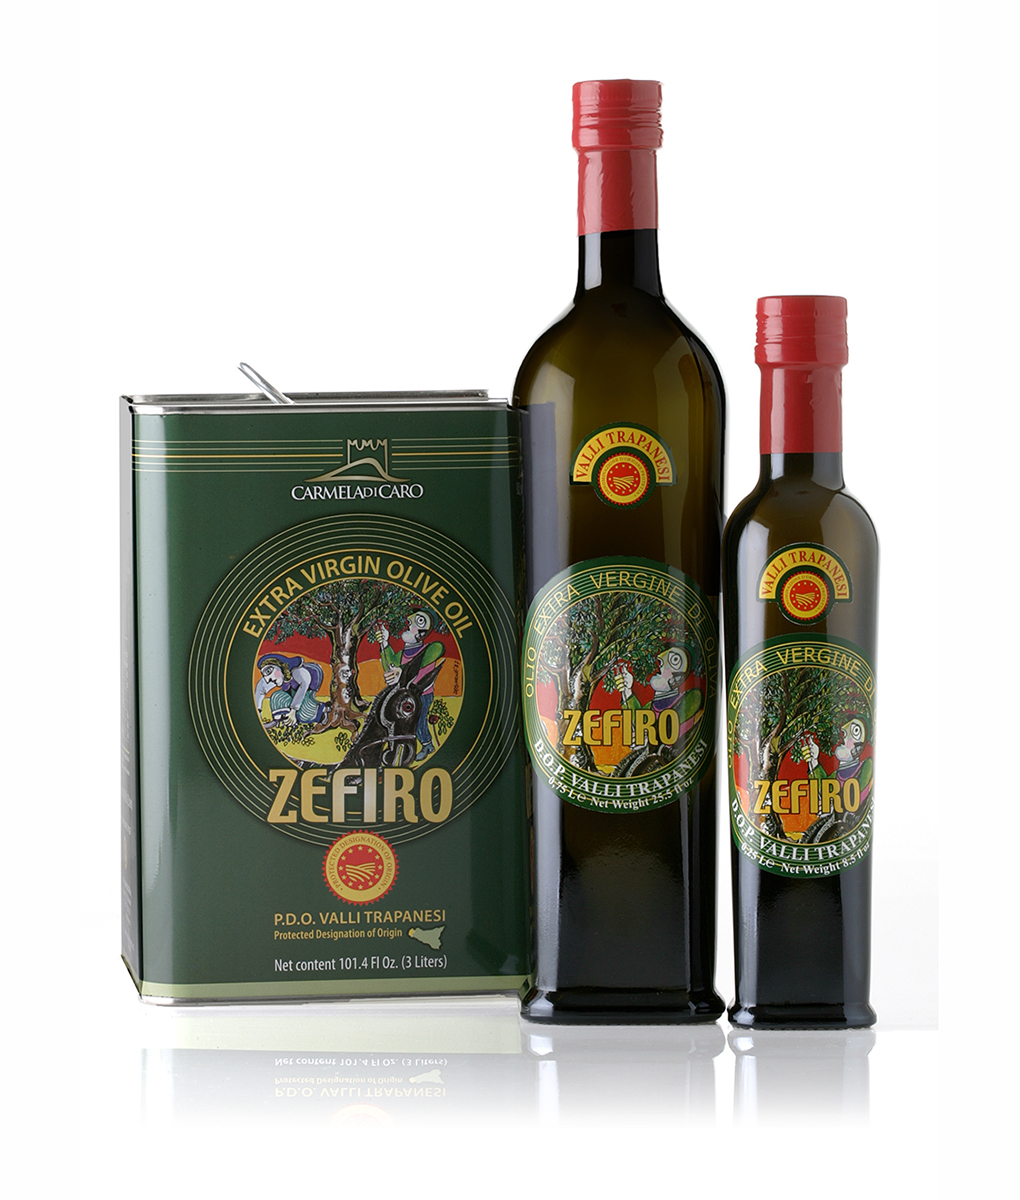 ZEFIRO Extra virgin olive oil - D.O.P. Valli Trapanesi A SPECIAL TASTE AND SMELL FROM SELECTIONED VARIETIES Obtained from the olive groves of the “Valli Trapanesi”, Zefiro is a palatable and lightly spicy extra virgin oil, with a fruity smell.  Suitable for every courses, specially advised on both raw and coocked vegetables and fish dishes.